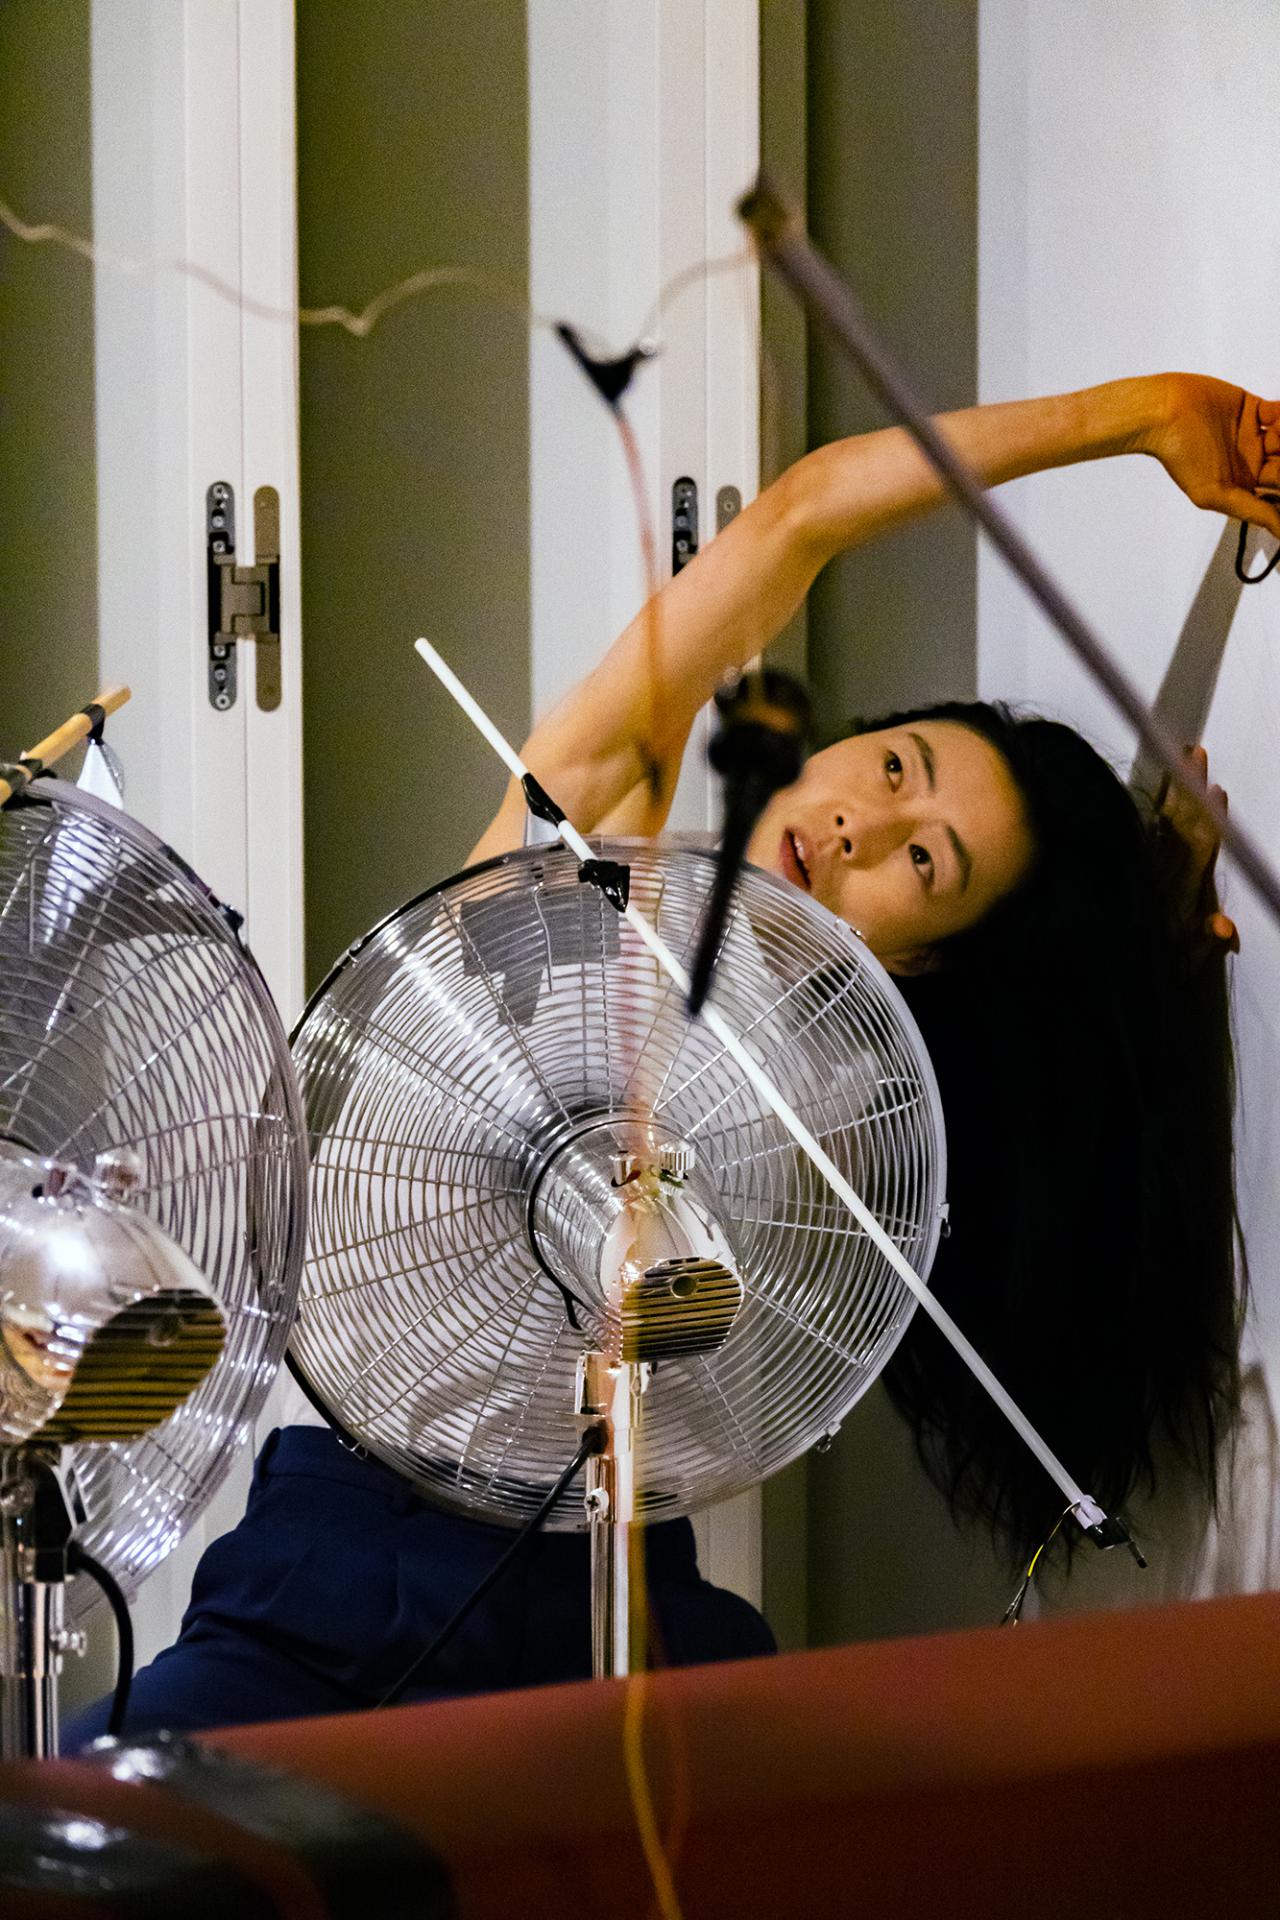 The photo shows a Korean performer bent to the left stretching her arm over her head while a large silver fan is standing in front of her.